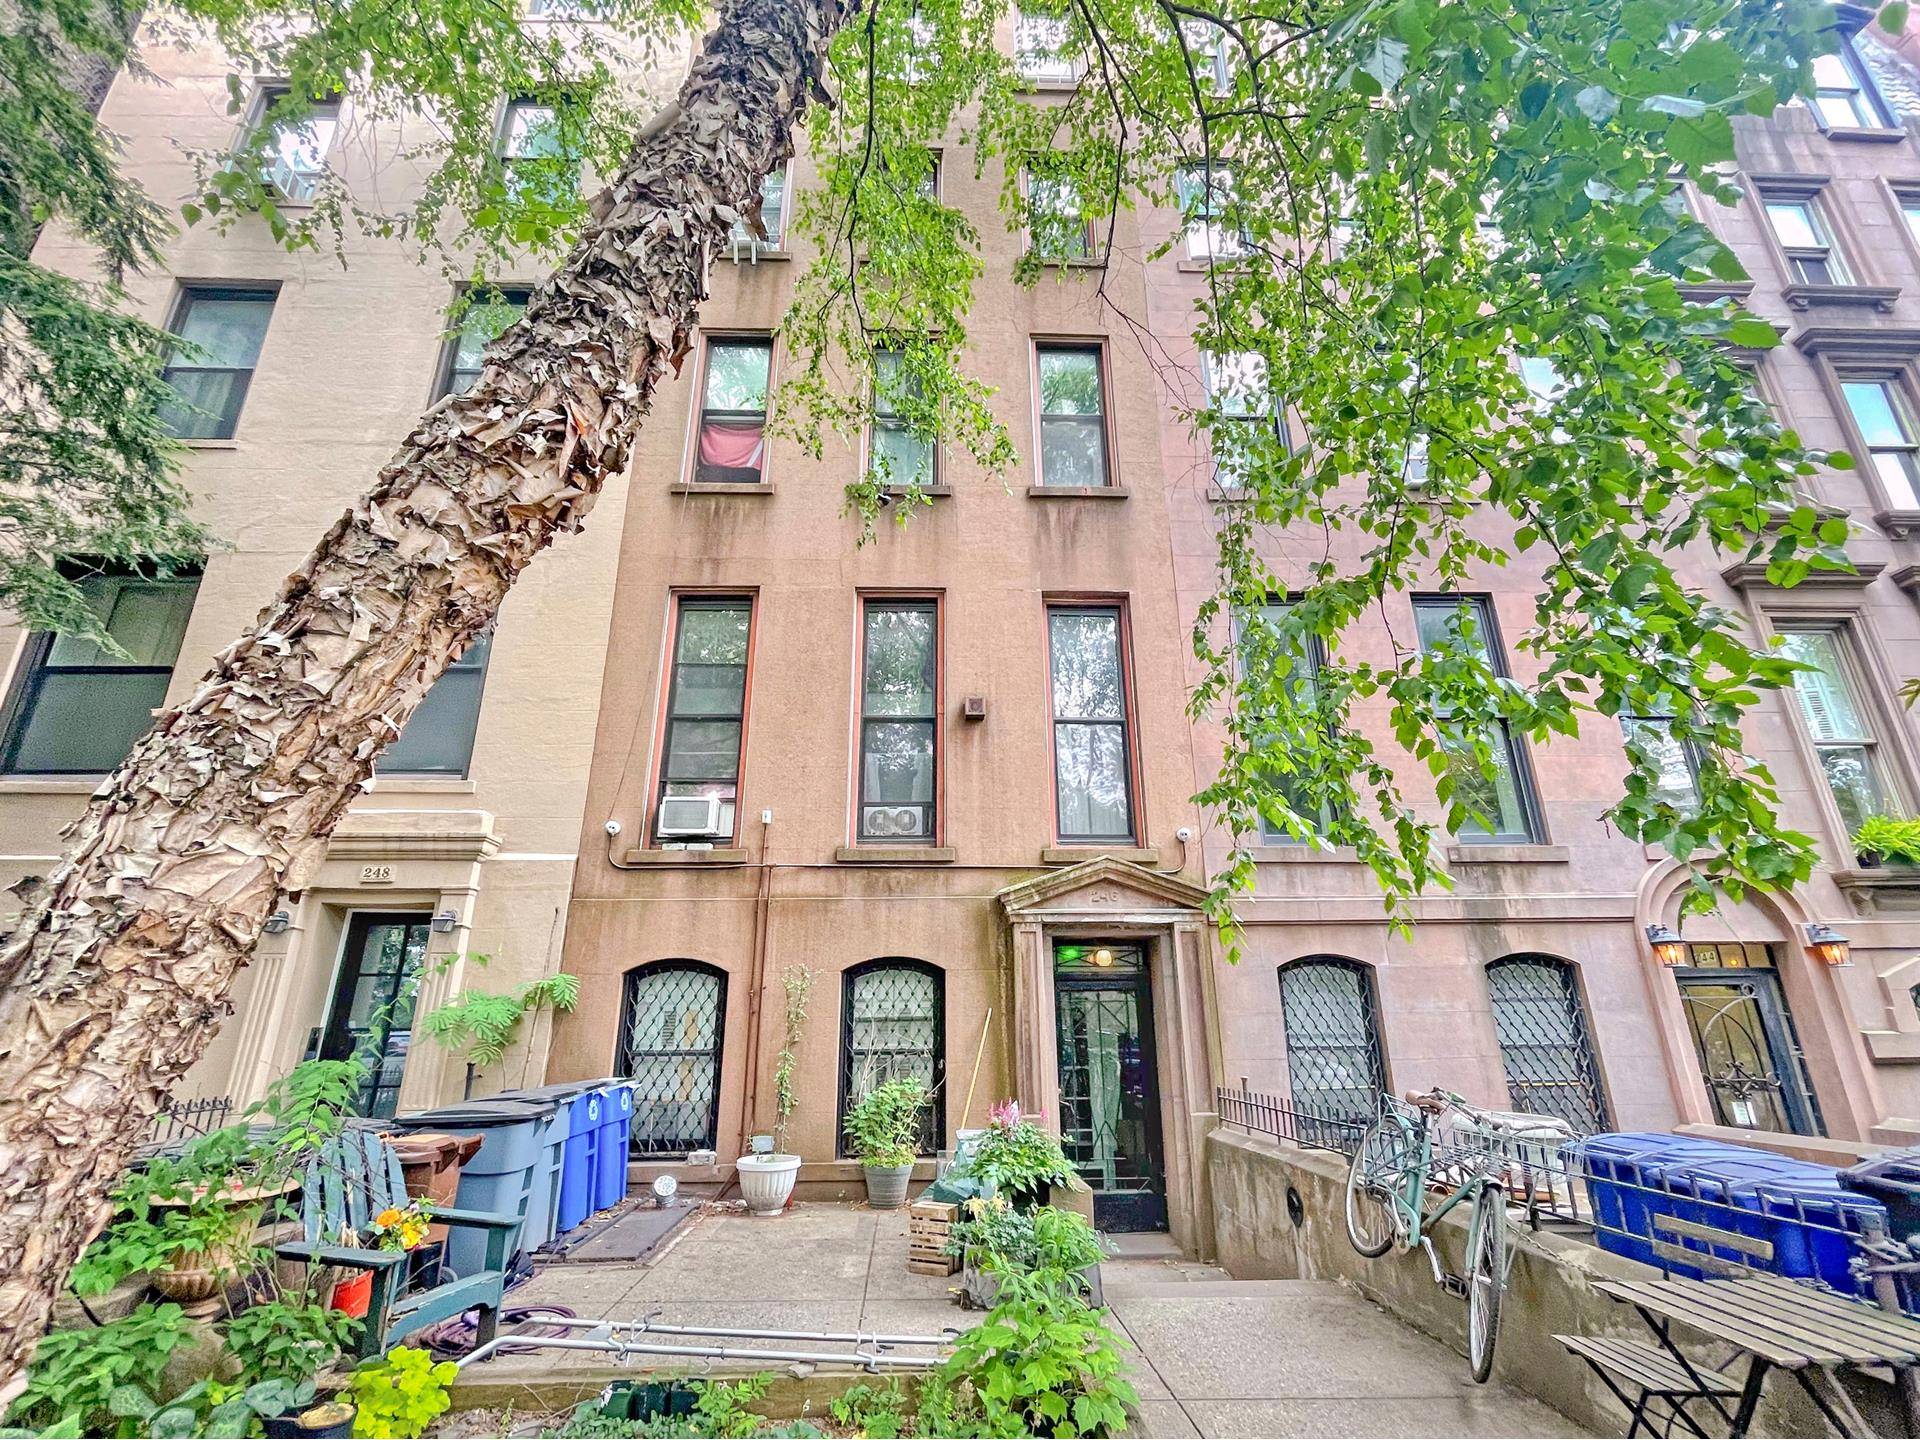 Introducing 246 Washington Avenue, a late nineteenth century fully free market 5 unit neo grec multifamily brownstone in historic Clinton Hill, located on a serene tree lined block, between Dekalb ...